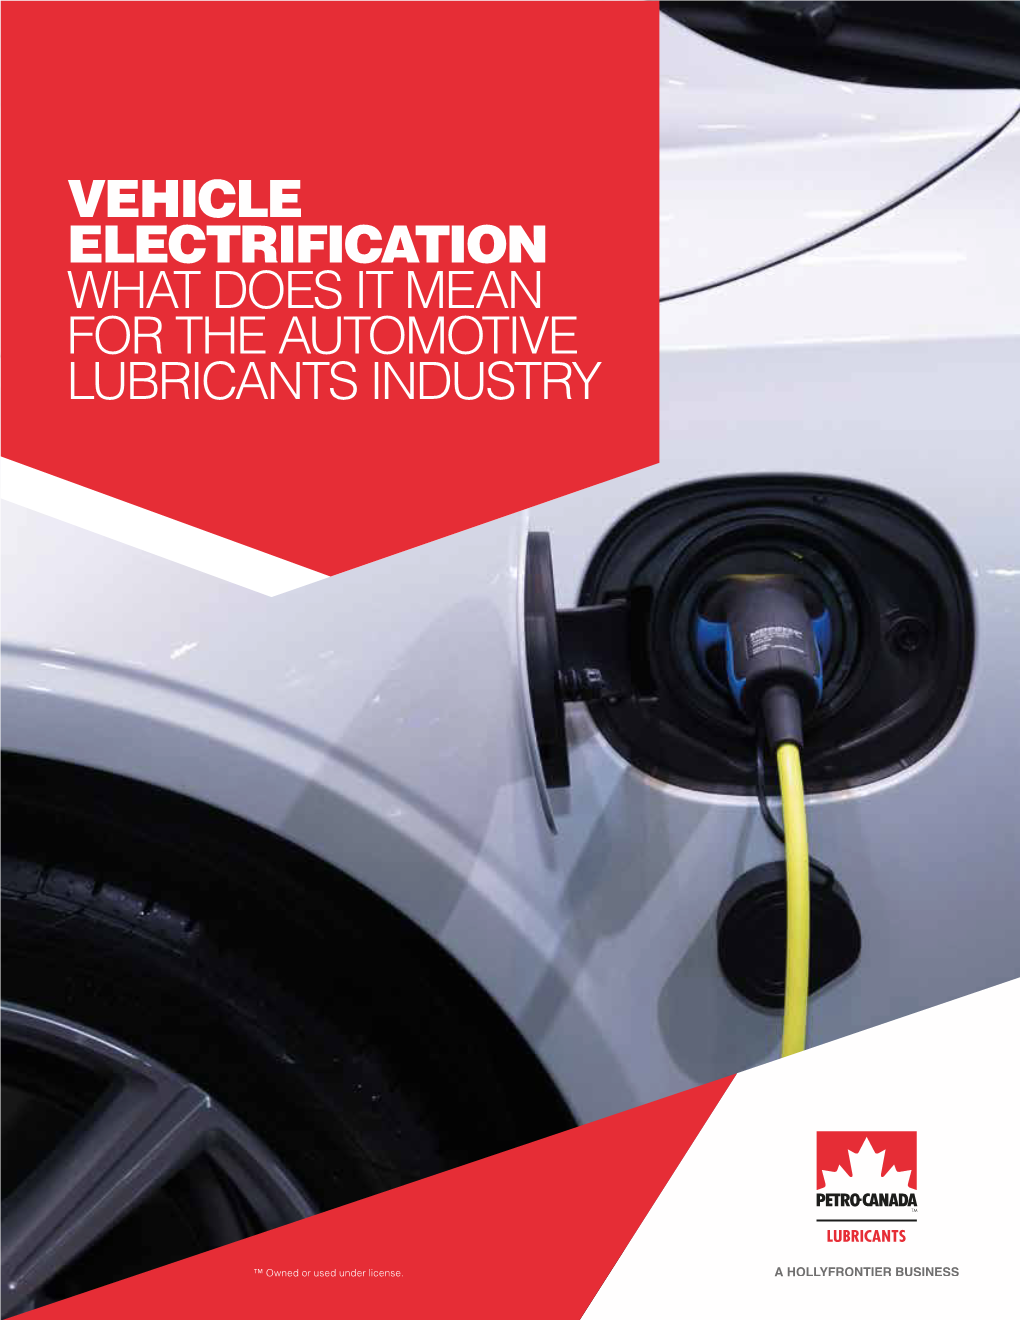 Vehicle Electrification What Does It Mean for the Automotive Lubricants Industry